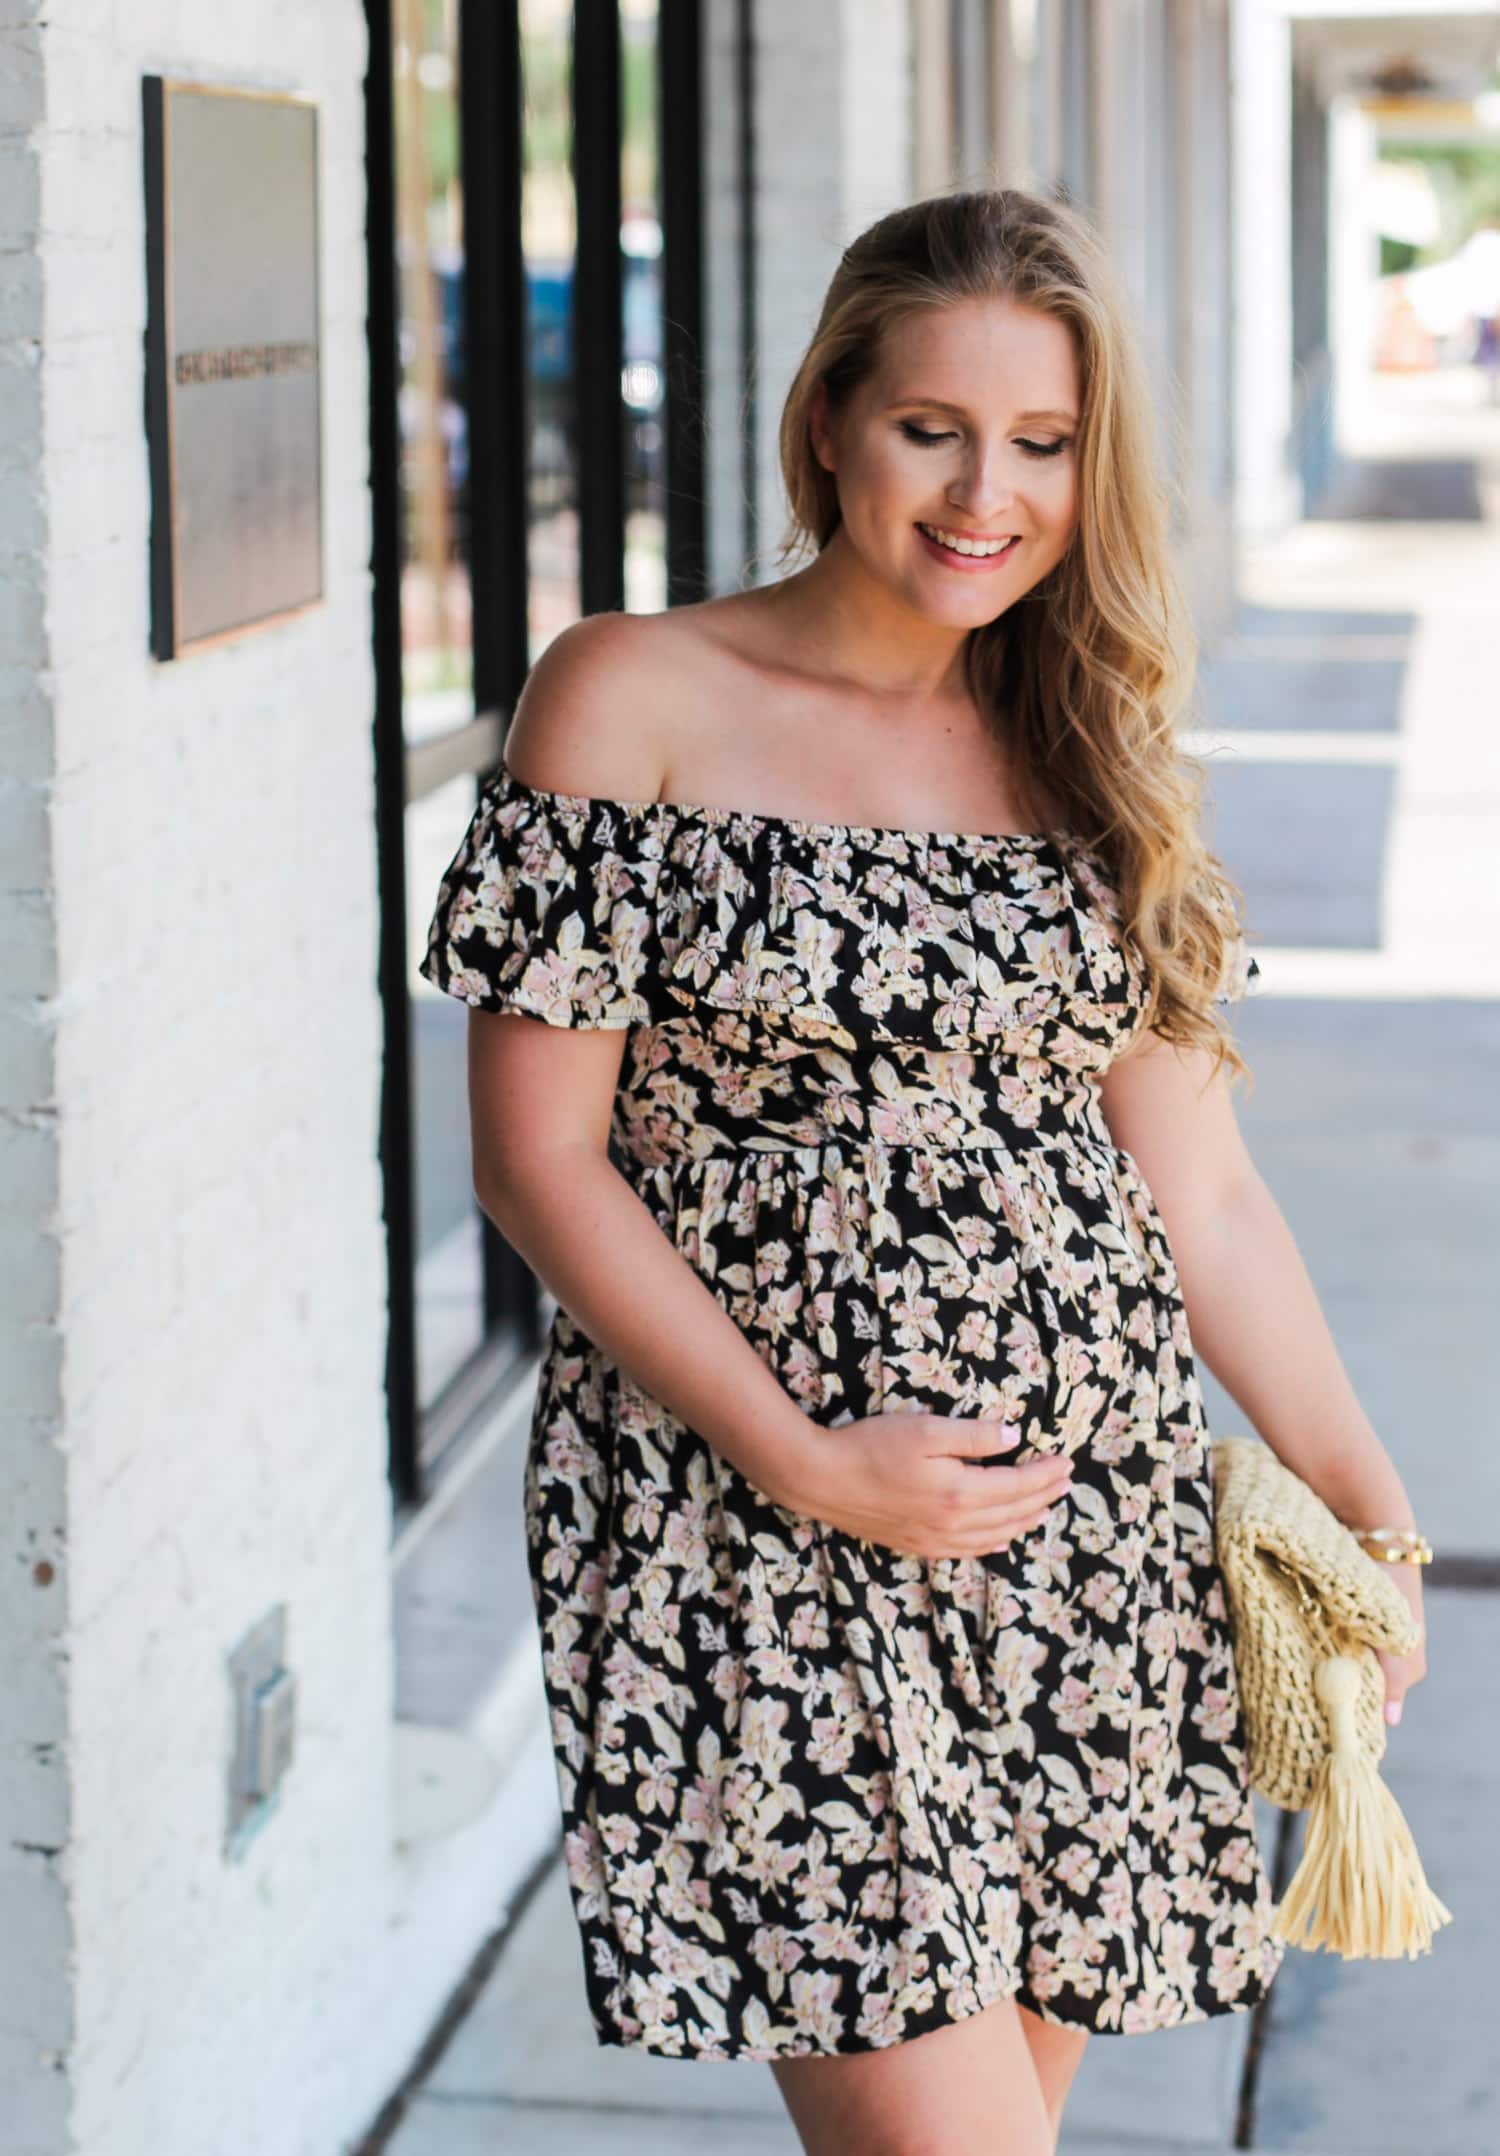 Loving this affordable floral dress for summer! It's non-maternity but still bump friendly! Can you believe this fit and flare sun dress is under $25, AND these gorgeous nude gladiator heeled sandals are also under $25? Click through this pin to see this cute summer maternity outfit idea styled by Orlando, Florida fashion blogger Ashley Brooke Nicholas! | Floral off the shoulder dress, straw clutch with tassel, raffia clutch, lace up sandals, lace up heels, cute summer heels, affordable outfit i